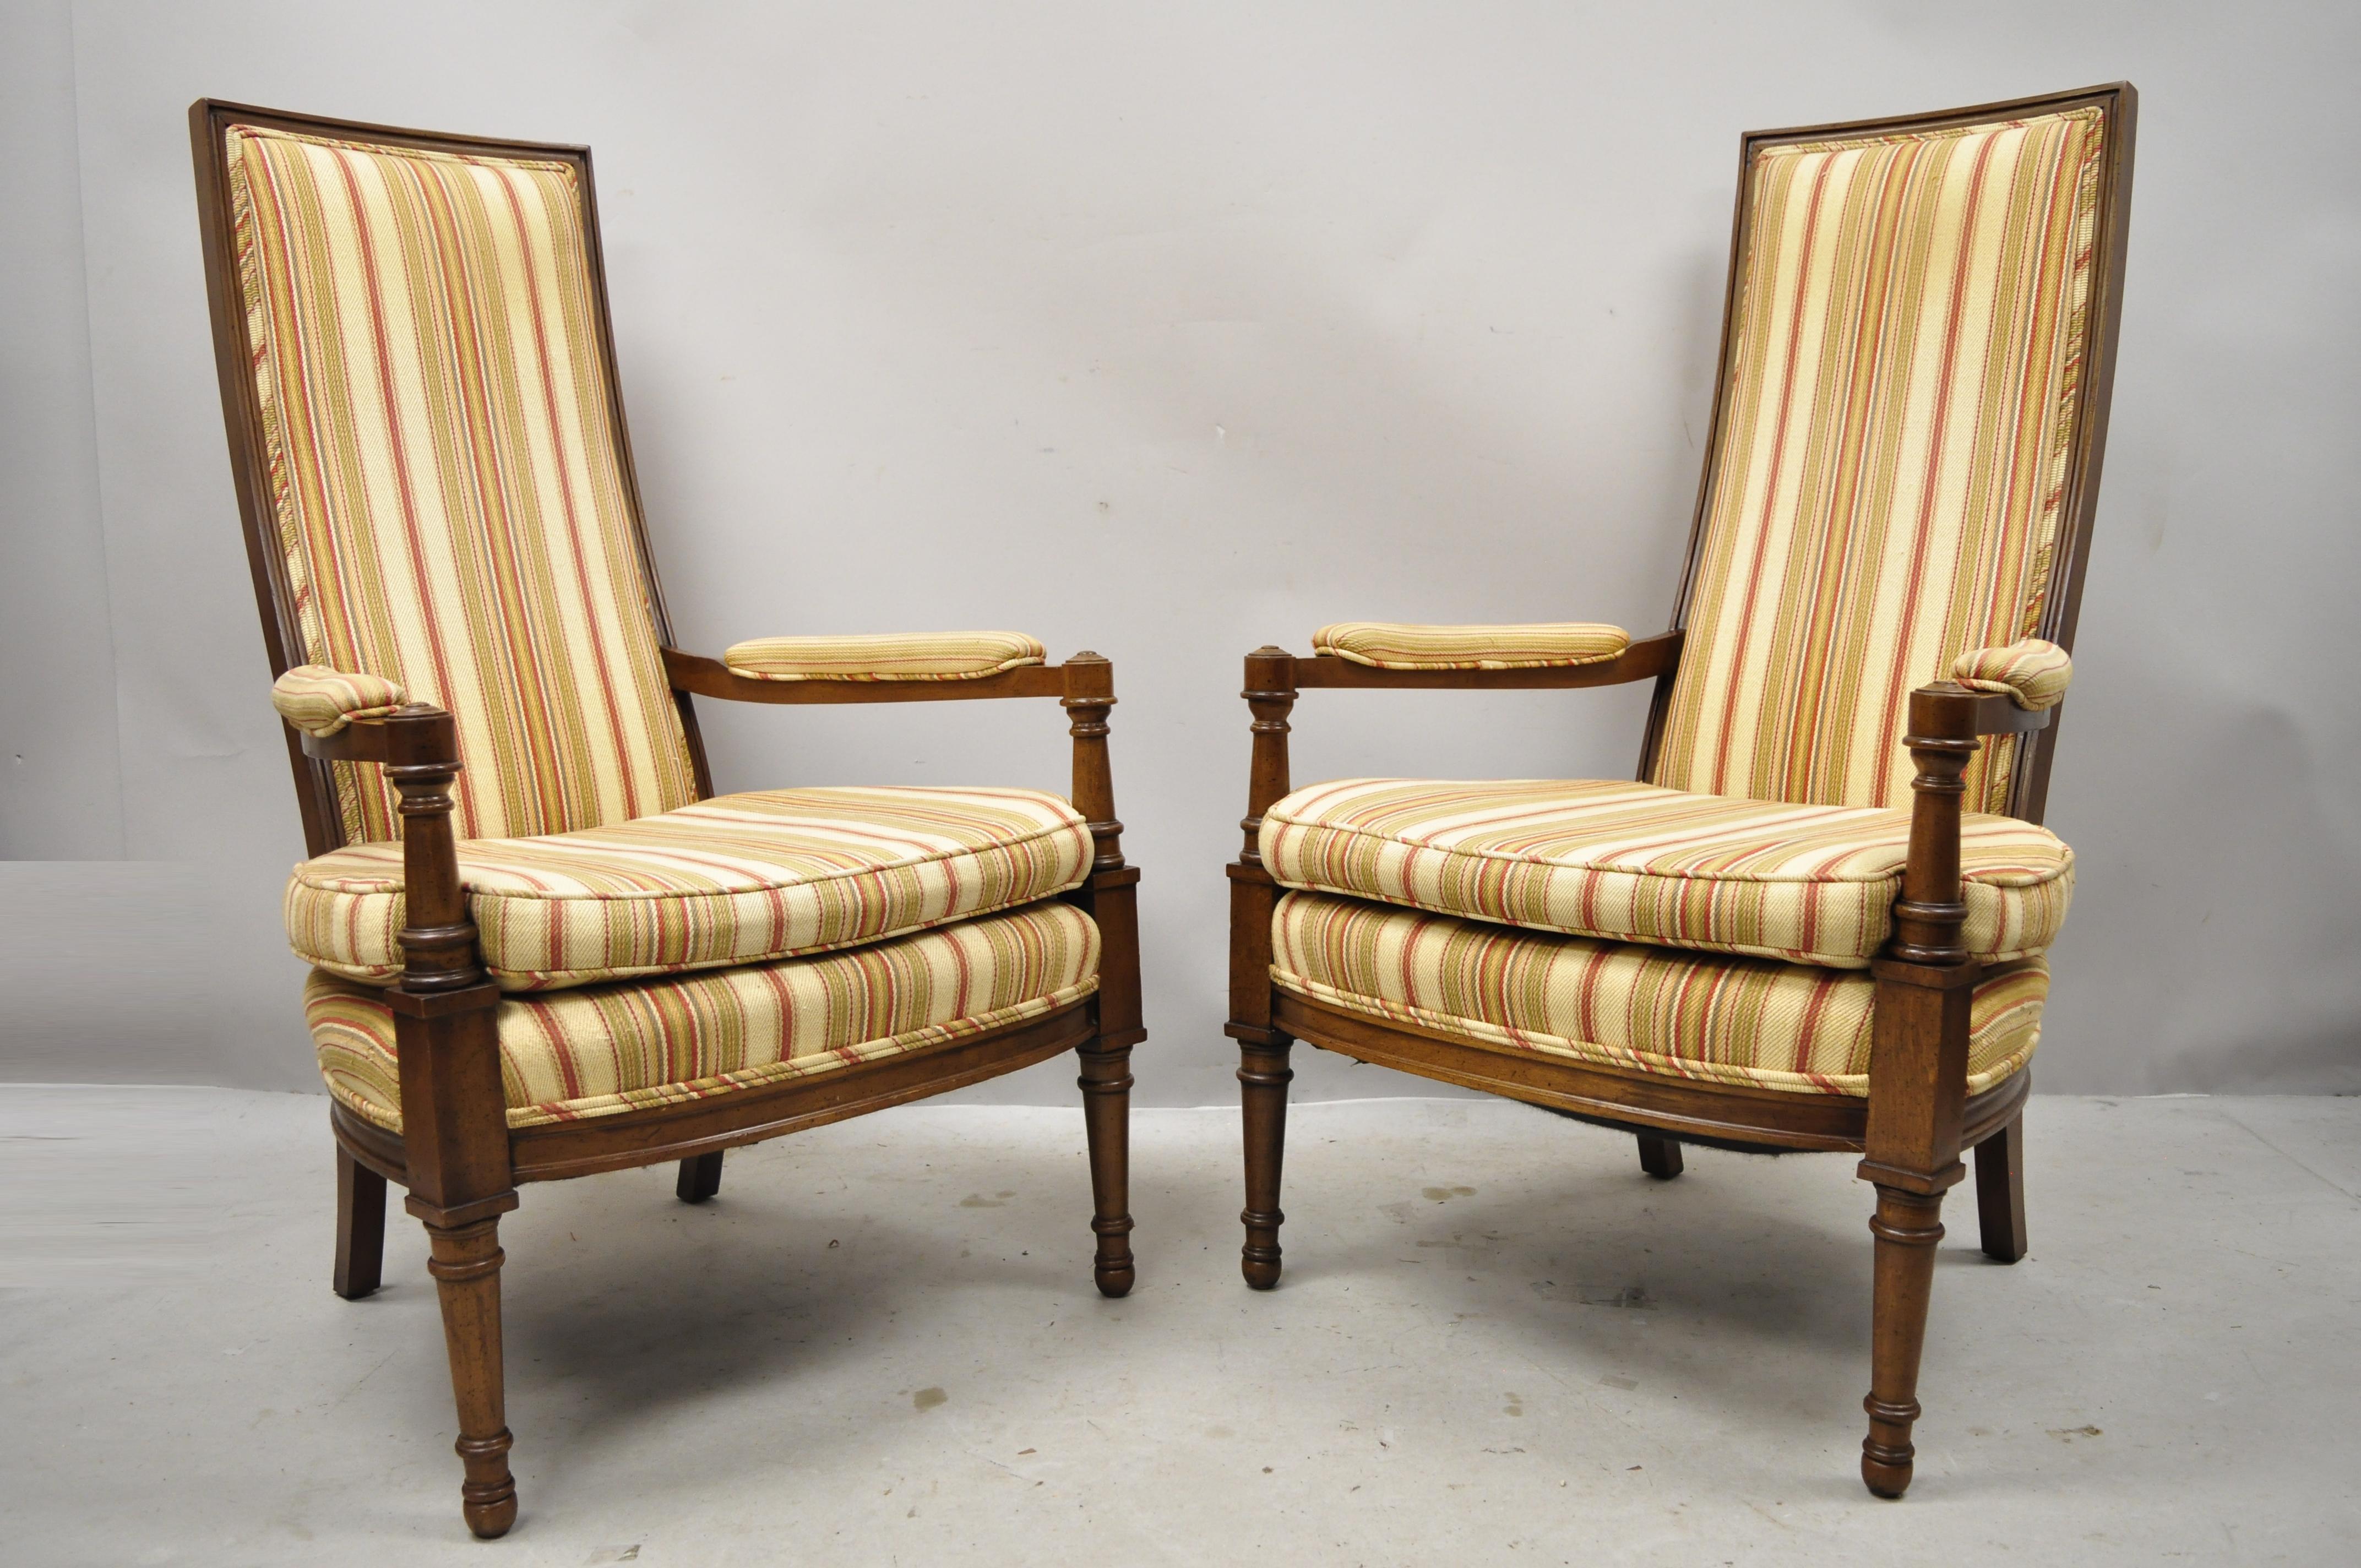 Hollywood Regency French style high back upholstered fireside armchairs - a pair. Pair features tall backs, solid wood frame, upholstered arm rests, nicely carved details, tapered legs, great style and form, circa mid-20th century.
Measurements: